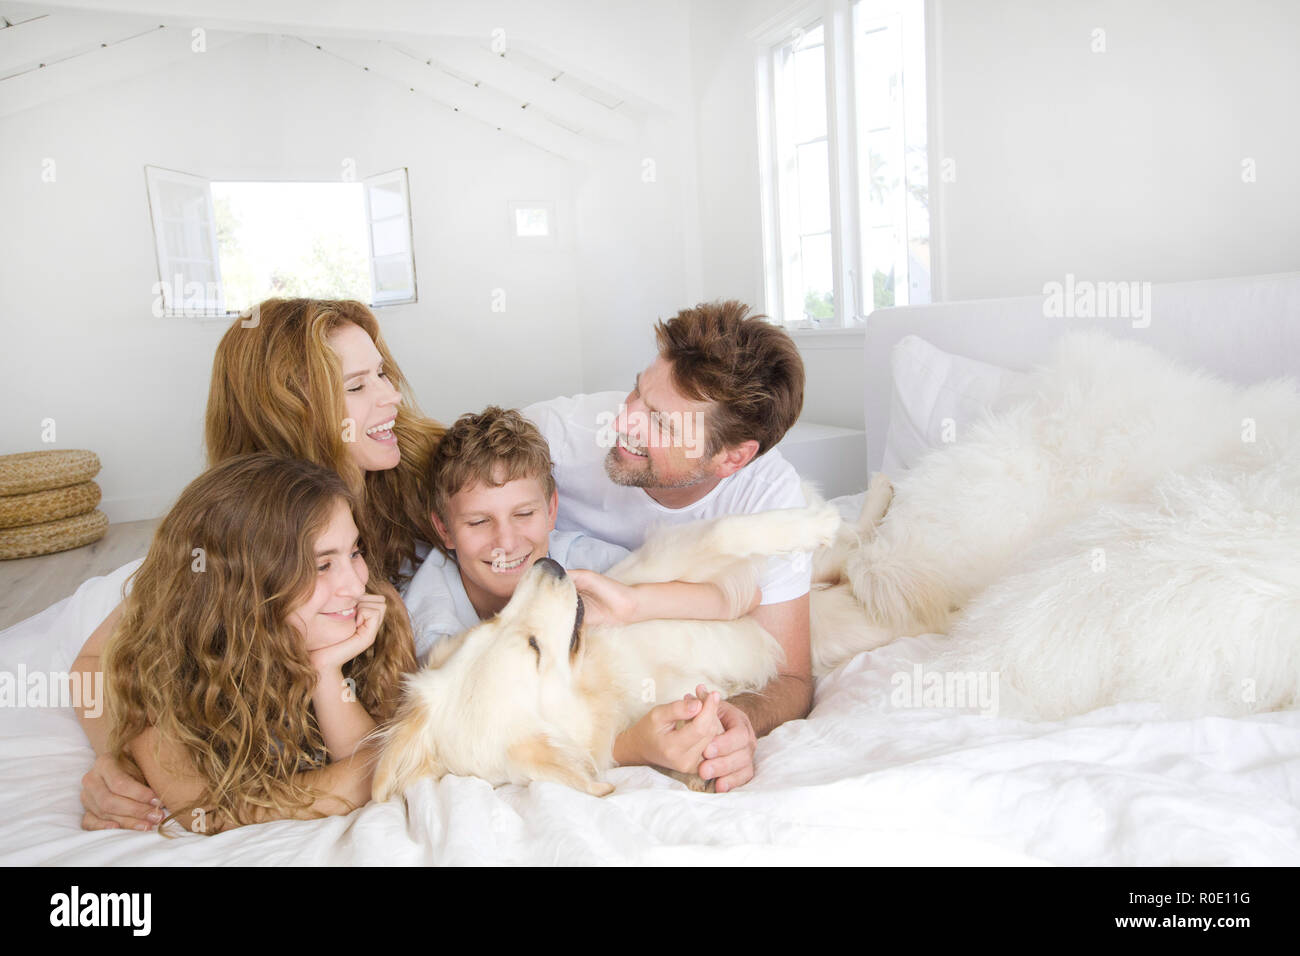 Happy Family Laying on Bed with Pet Dog Stock Photo